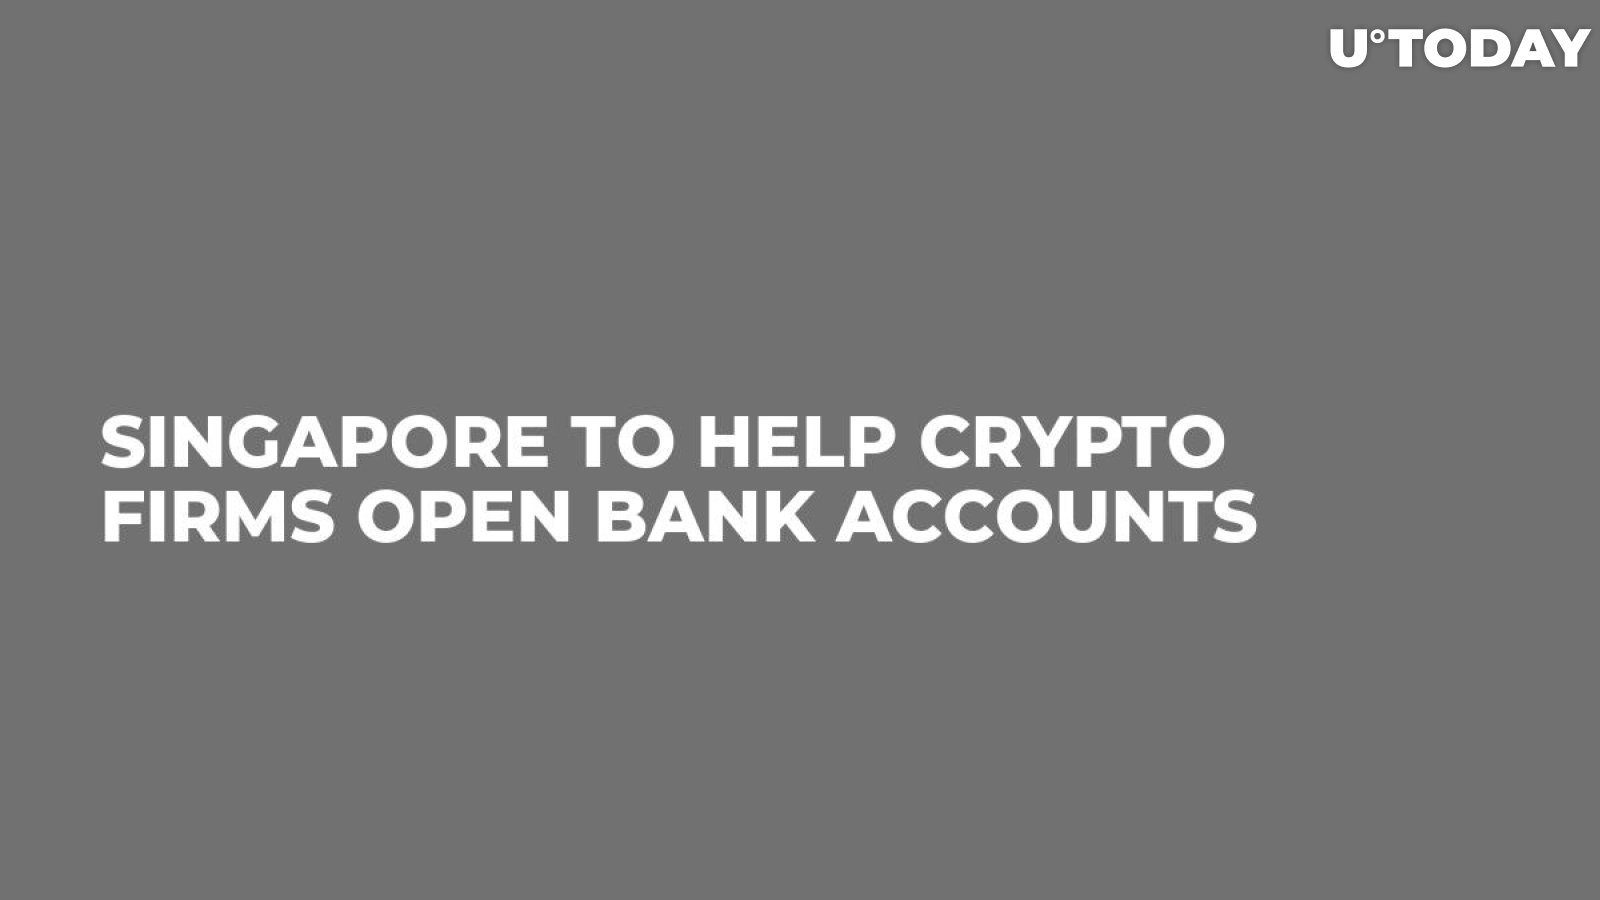 Singapore To Help Crypto Firms Open Bank Accounts